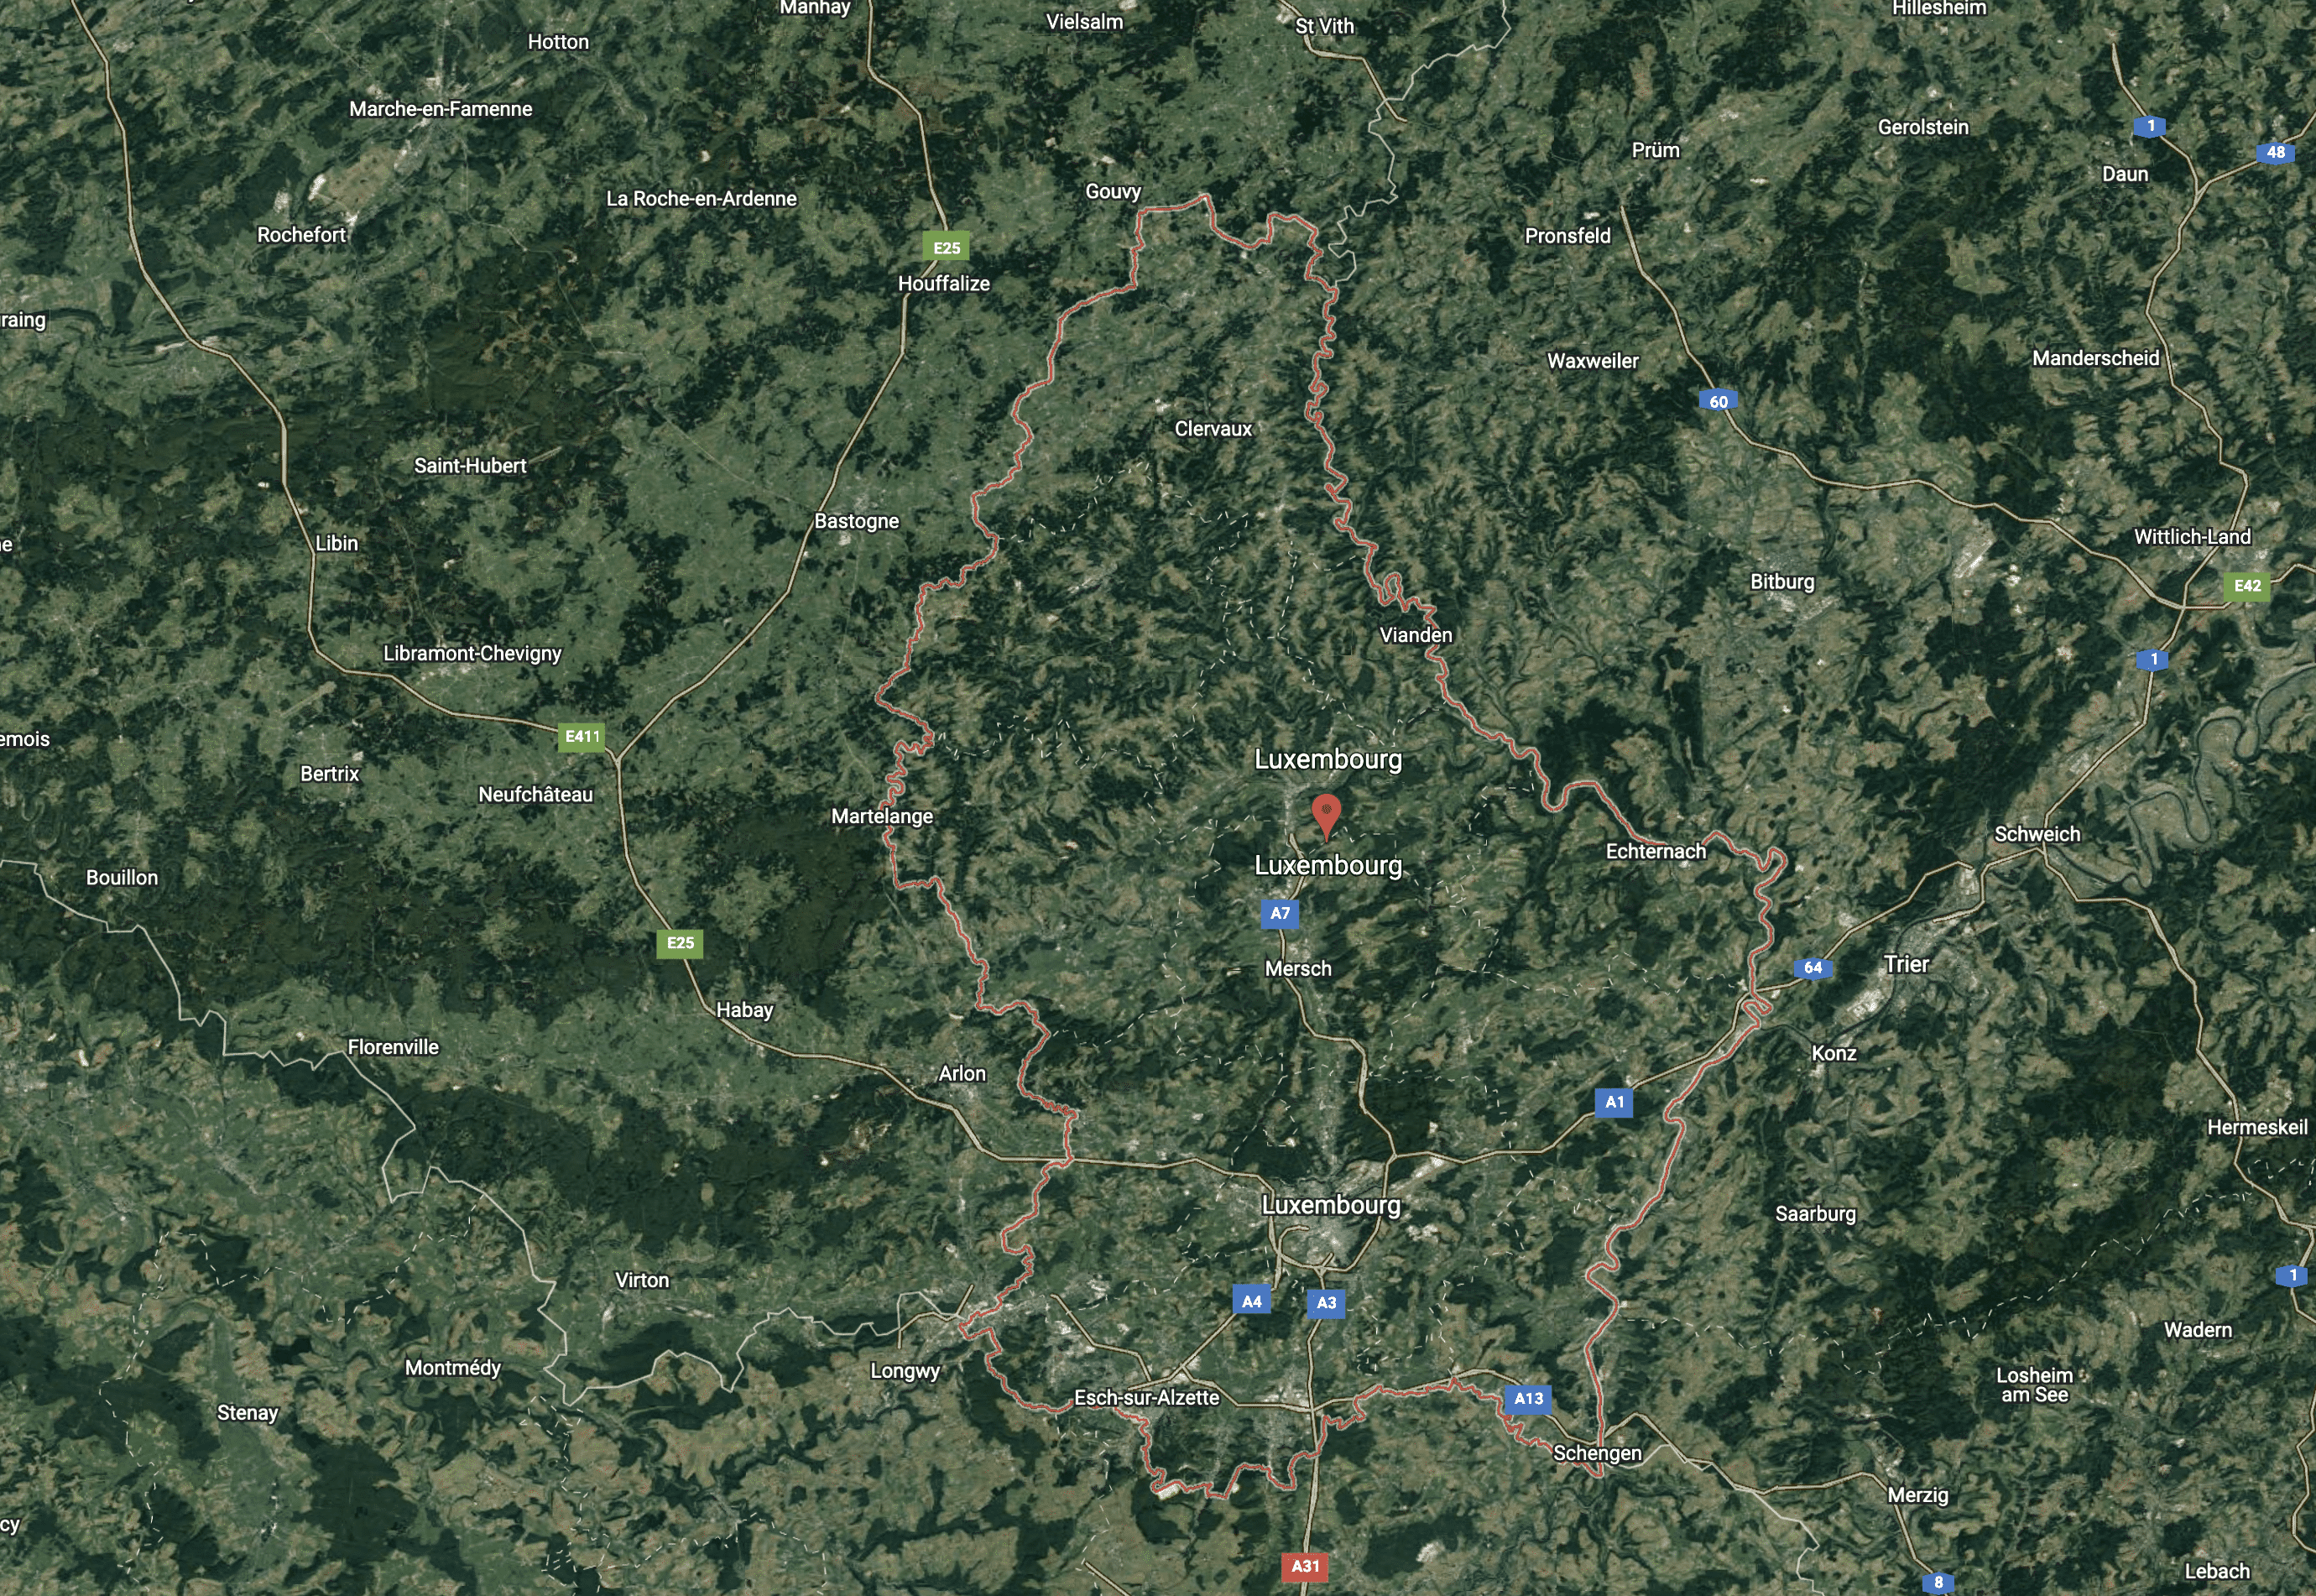 Google Earth Satellite Image of Luxembourg